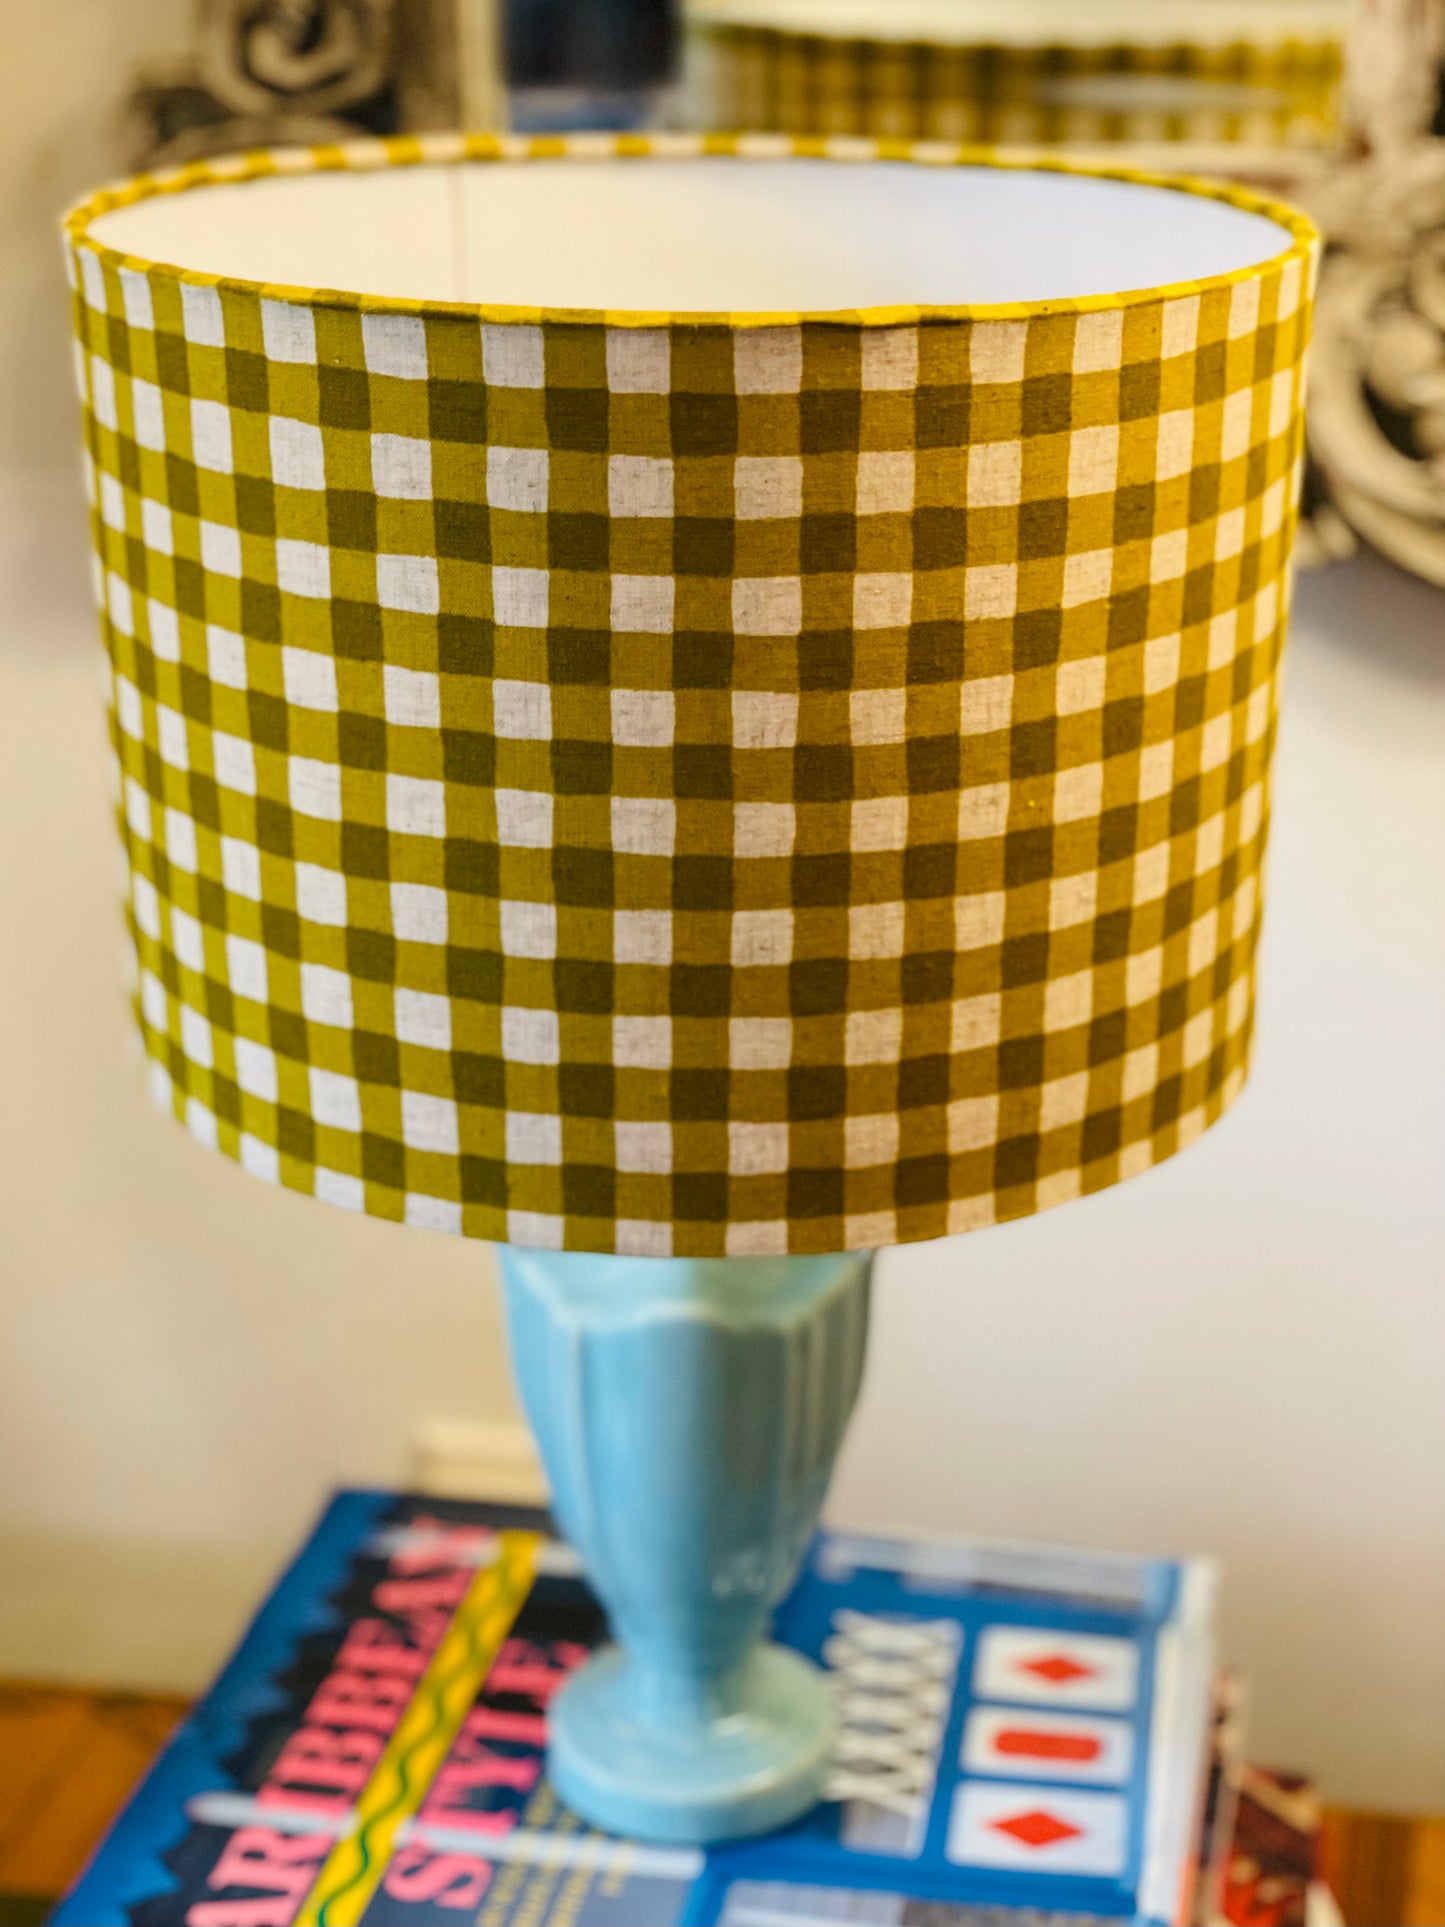 10 inch Drum Lampshade. Yellow-Green Gingham Cotton-Linen from Japan.